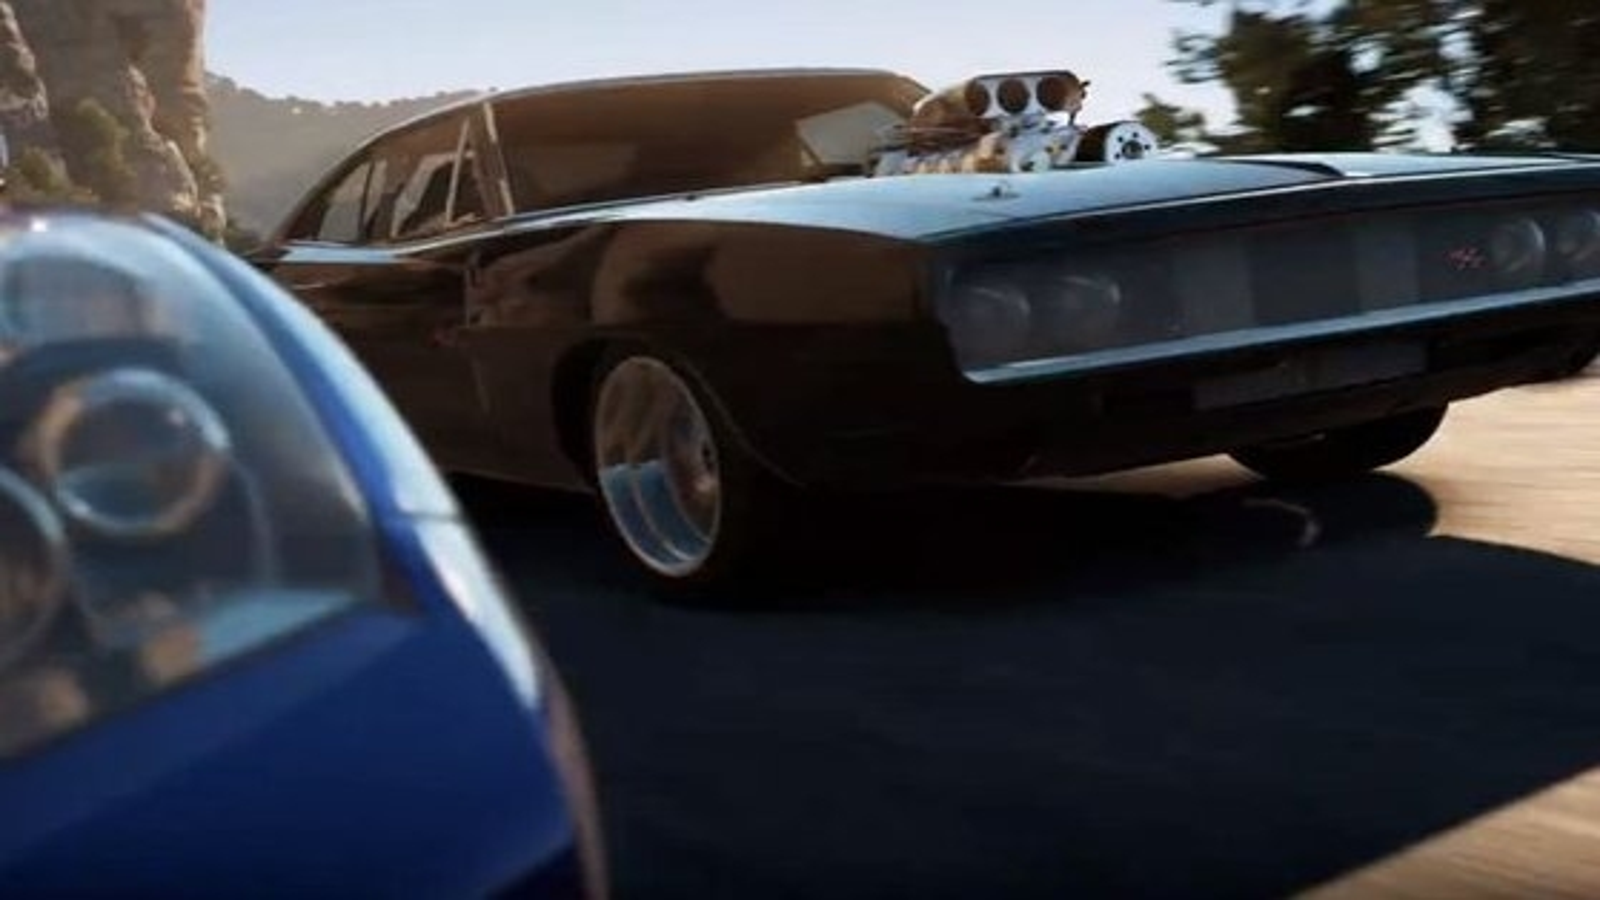 Forza Horizon 2 Presents Fast & Furious Review: Two Miles an Hour